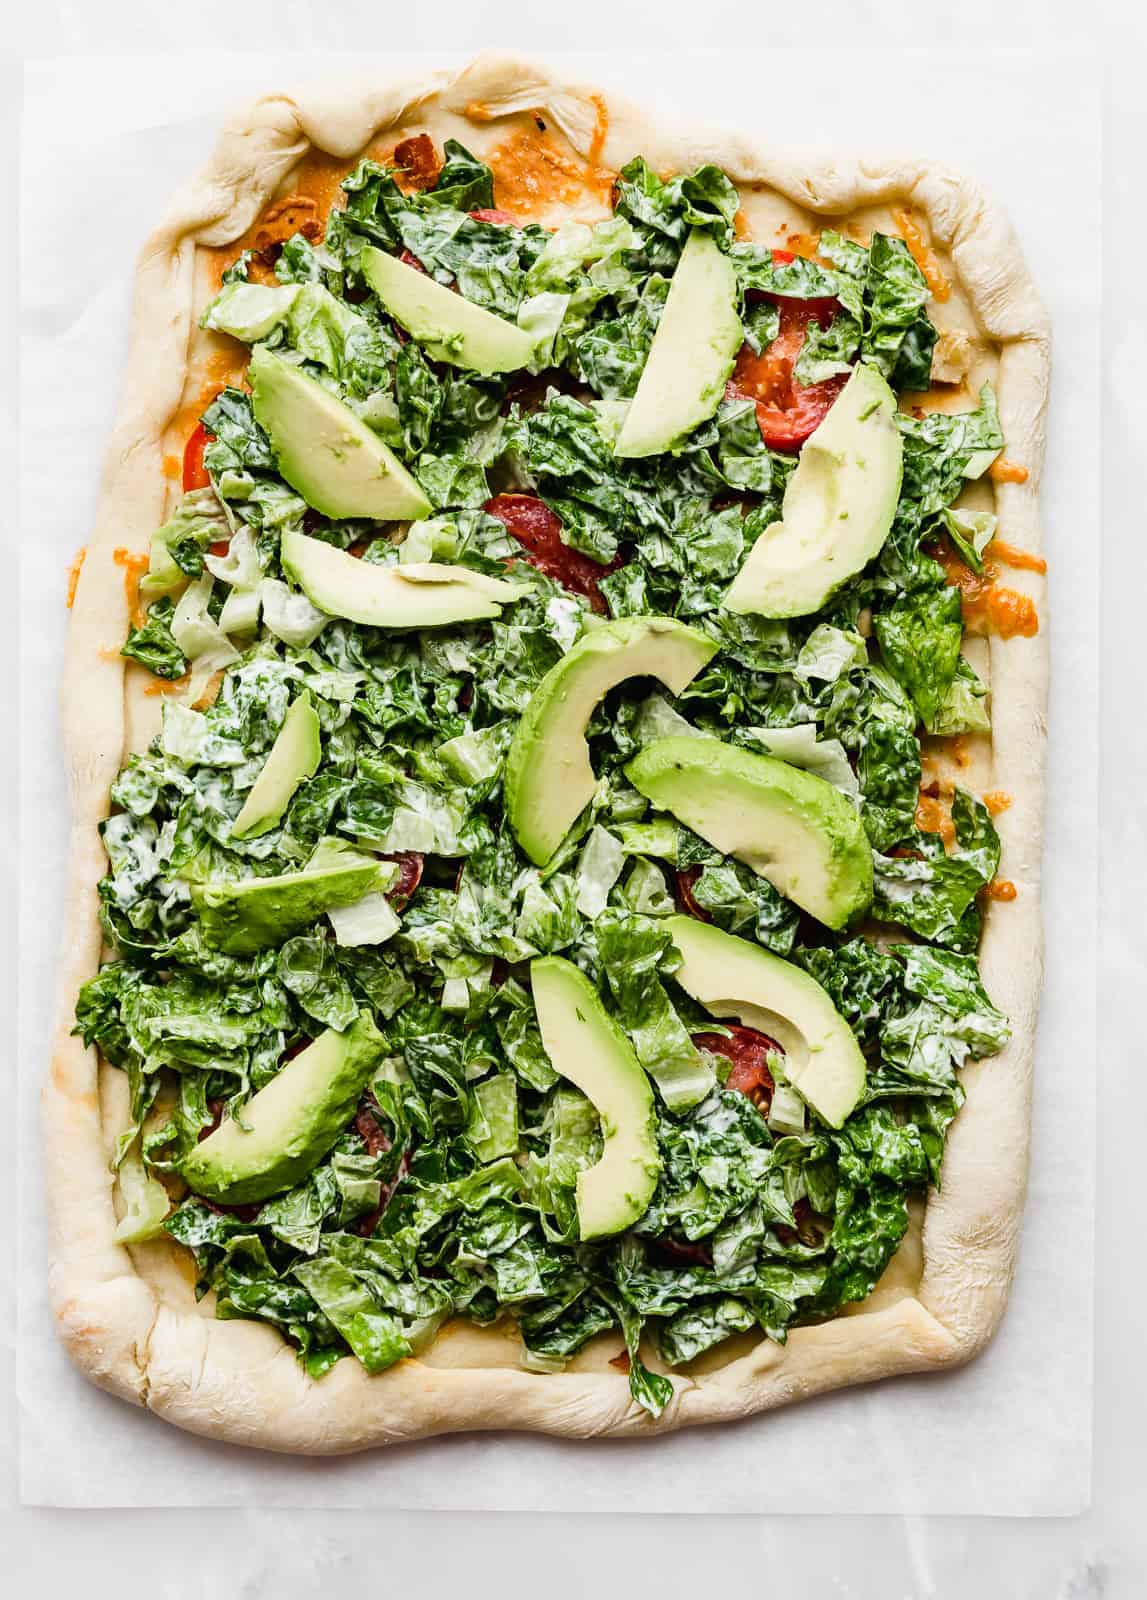 A square pizza topped with lettuce and avocado.